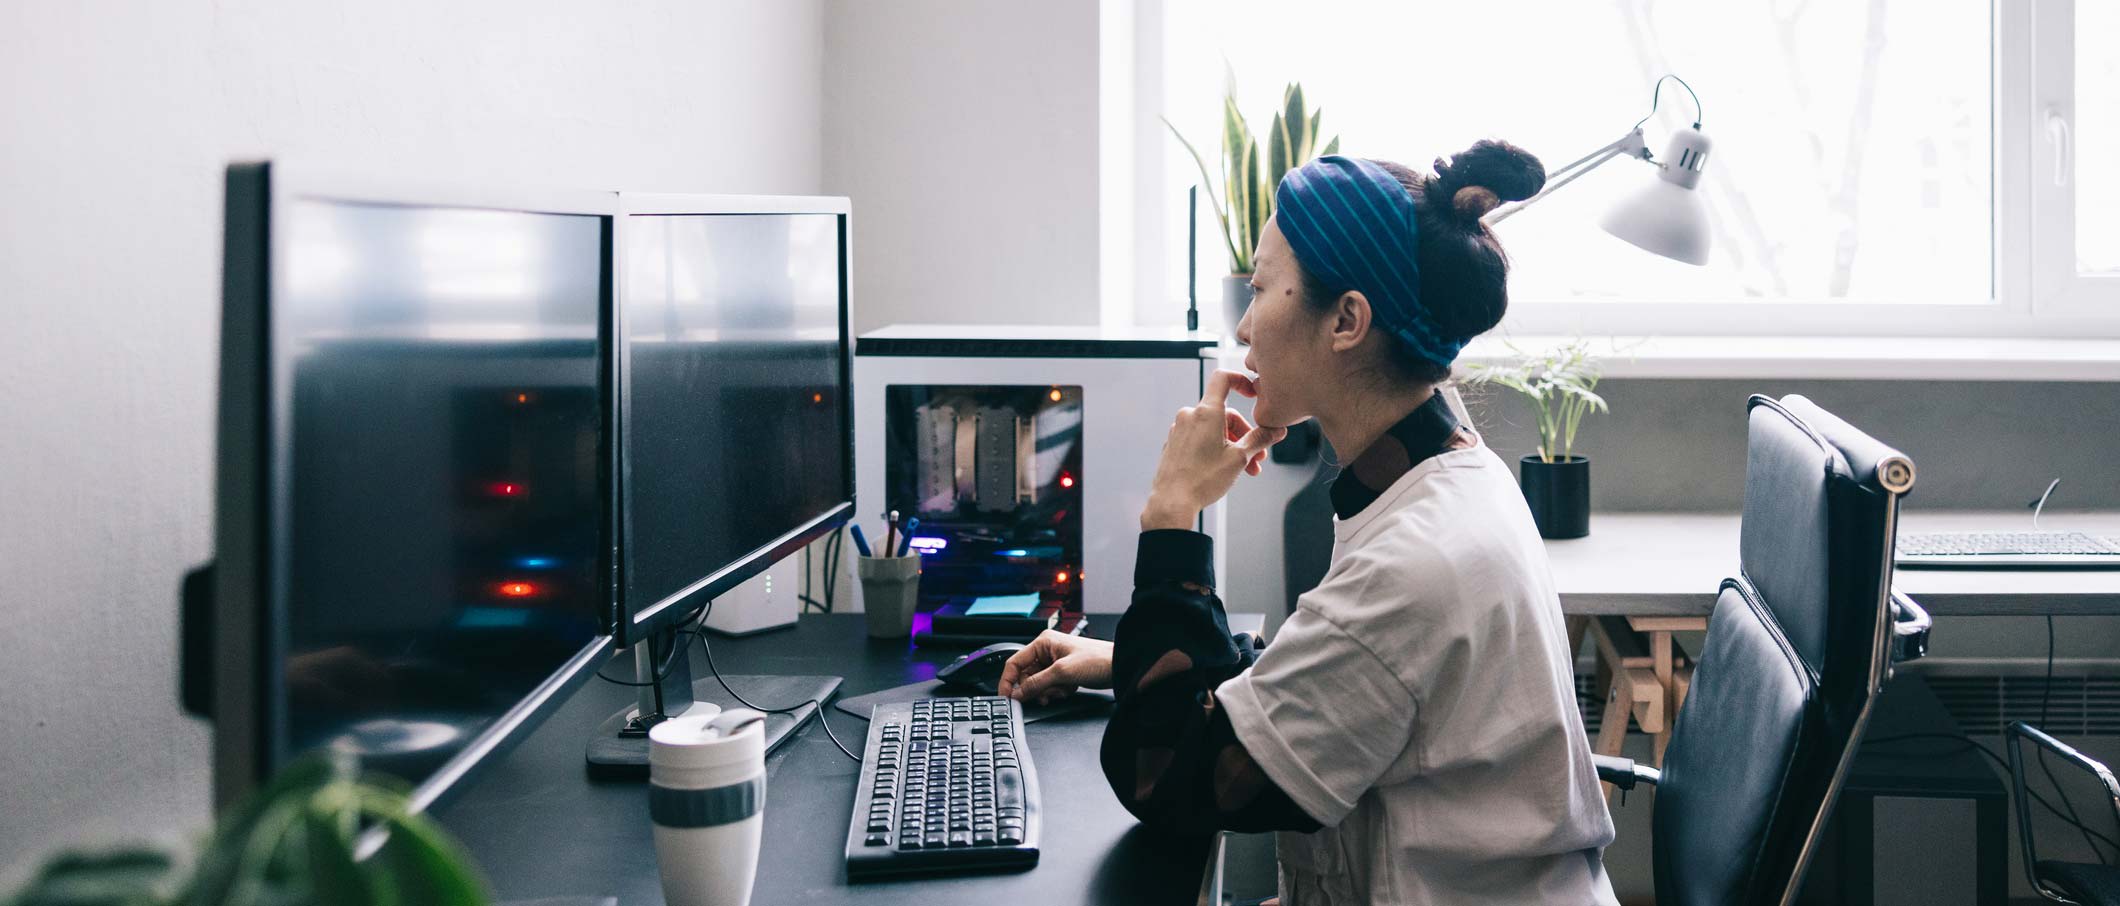 Developer sitting in front of her computer in an office